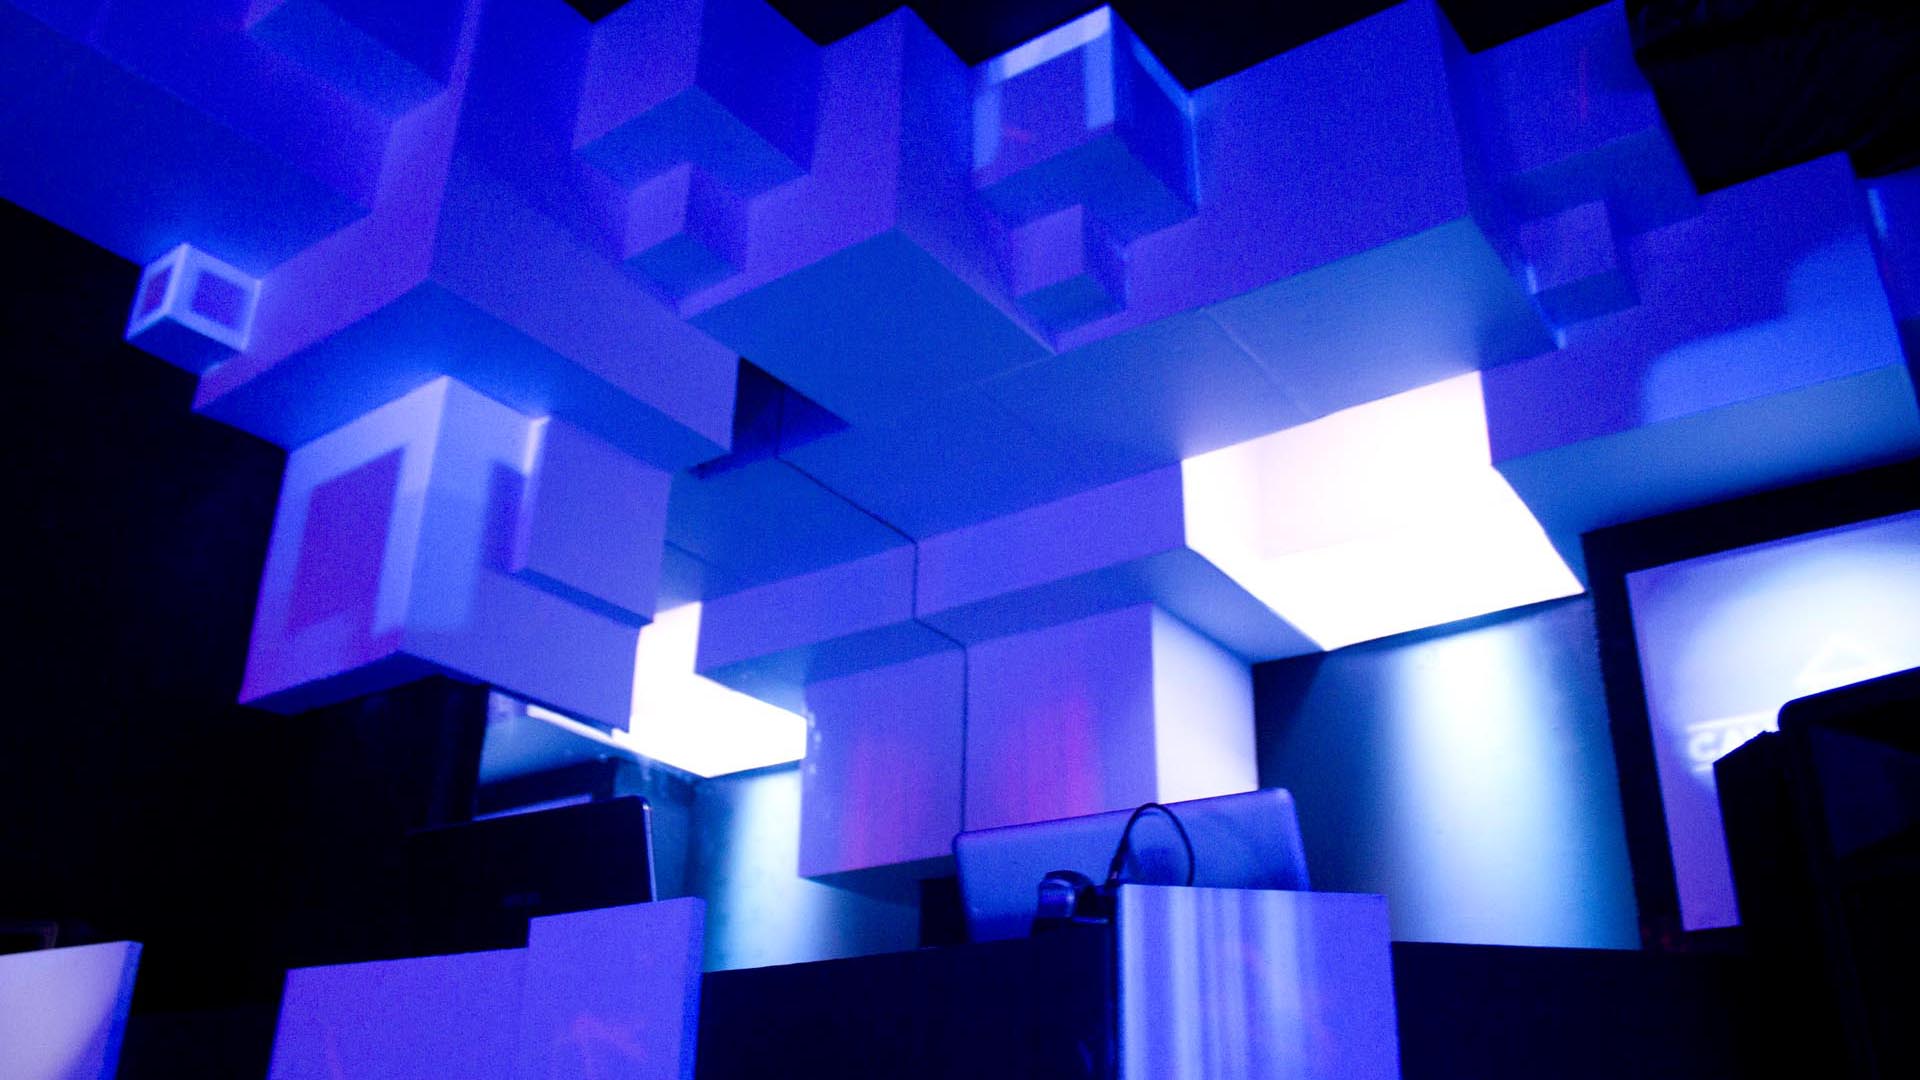 Explore the world of permanent video mapping at Cave Electro, where visuals and lights create a mesmerizing atmosphere.